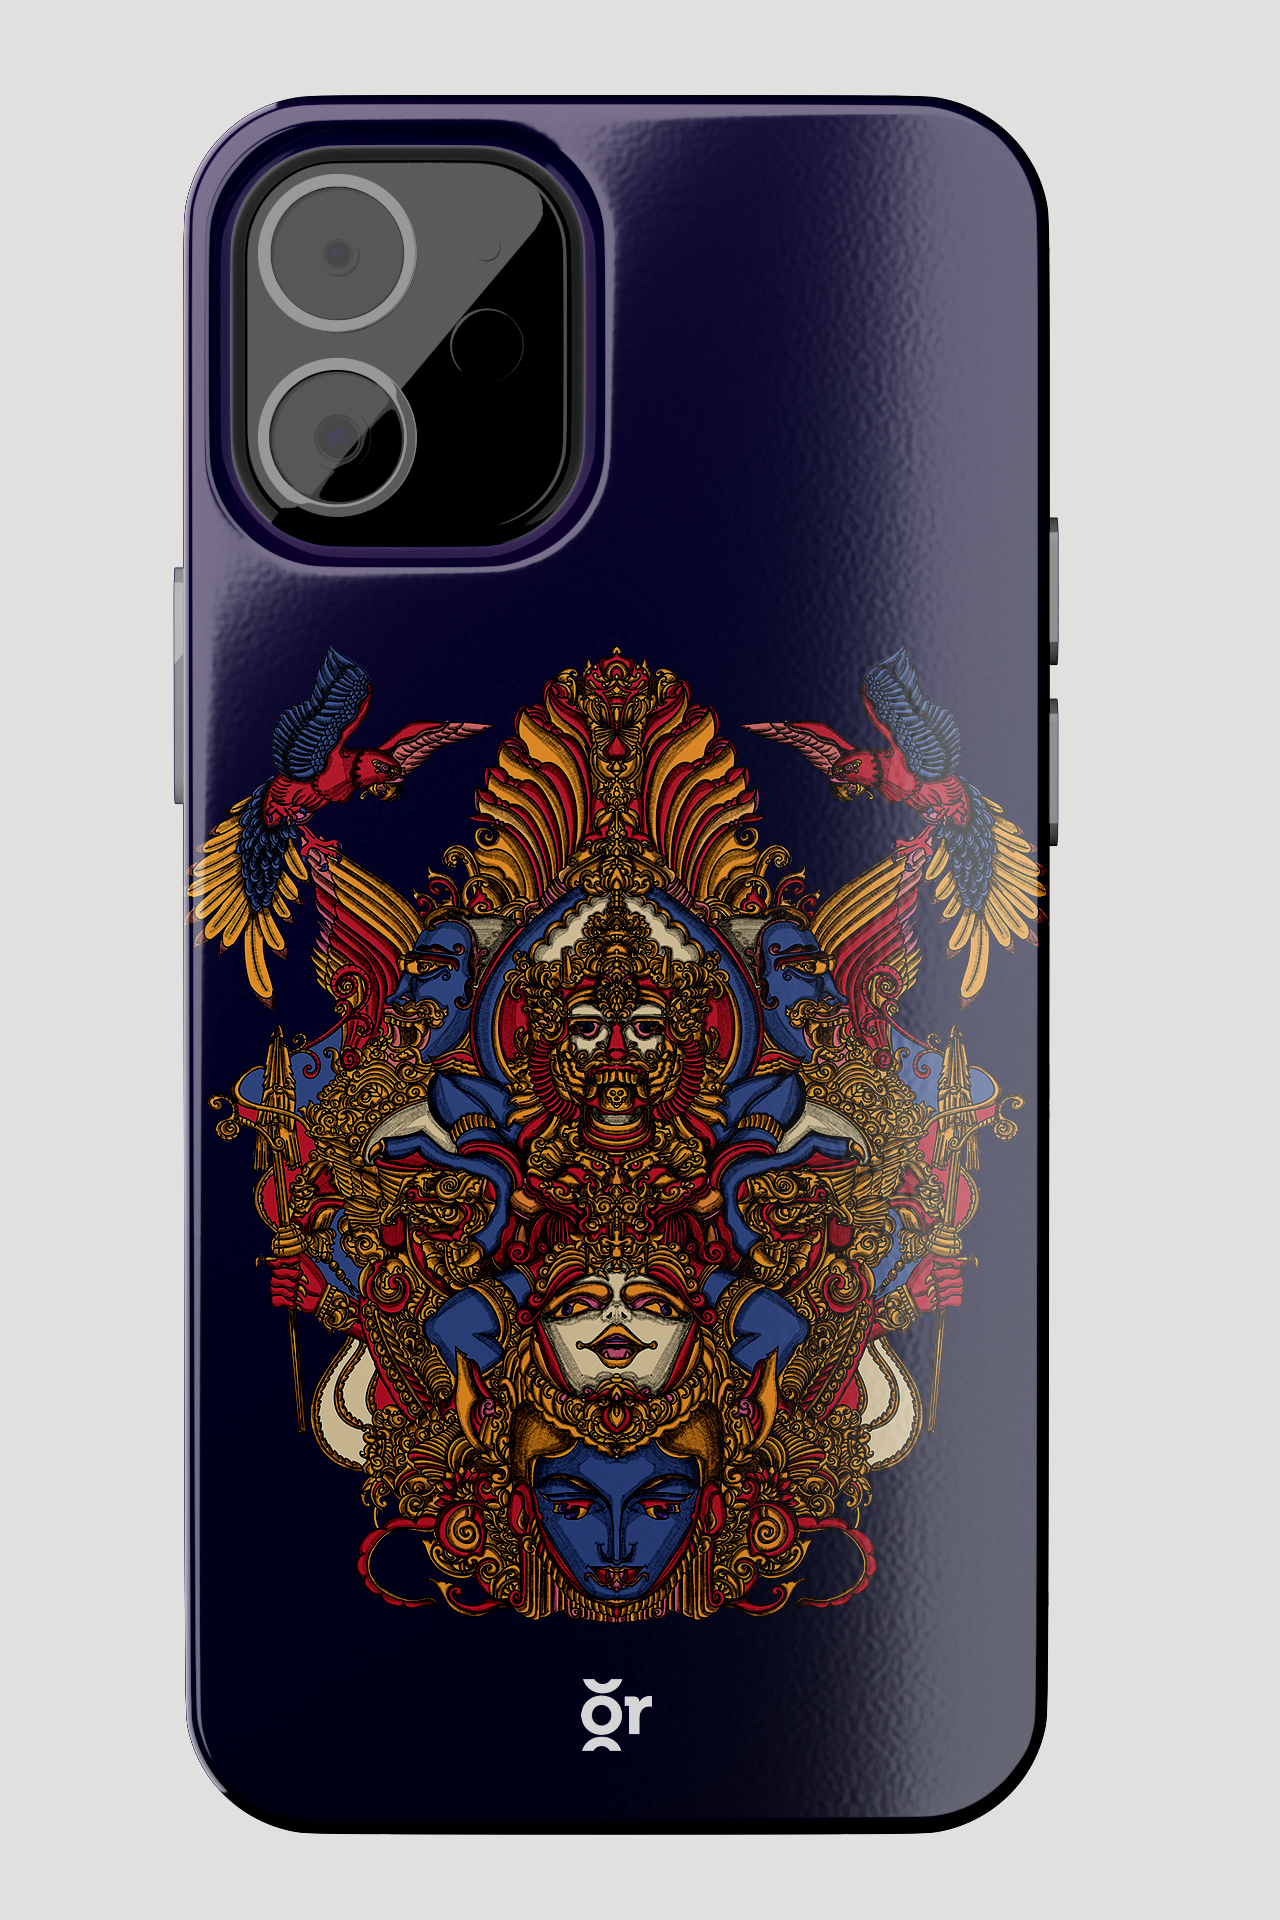 MOBILE CASE COVER: PATTERN 2